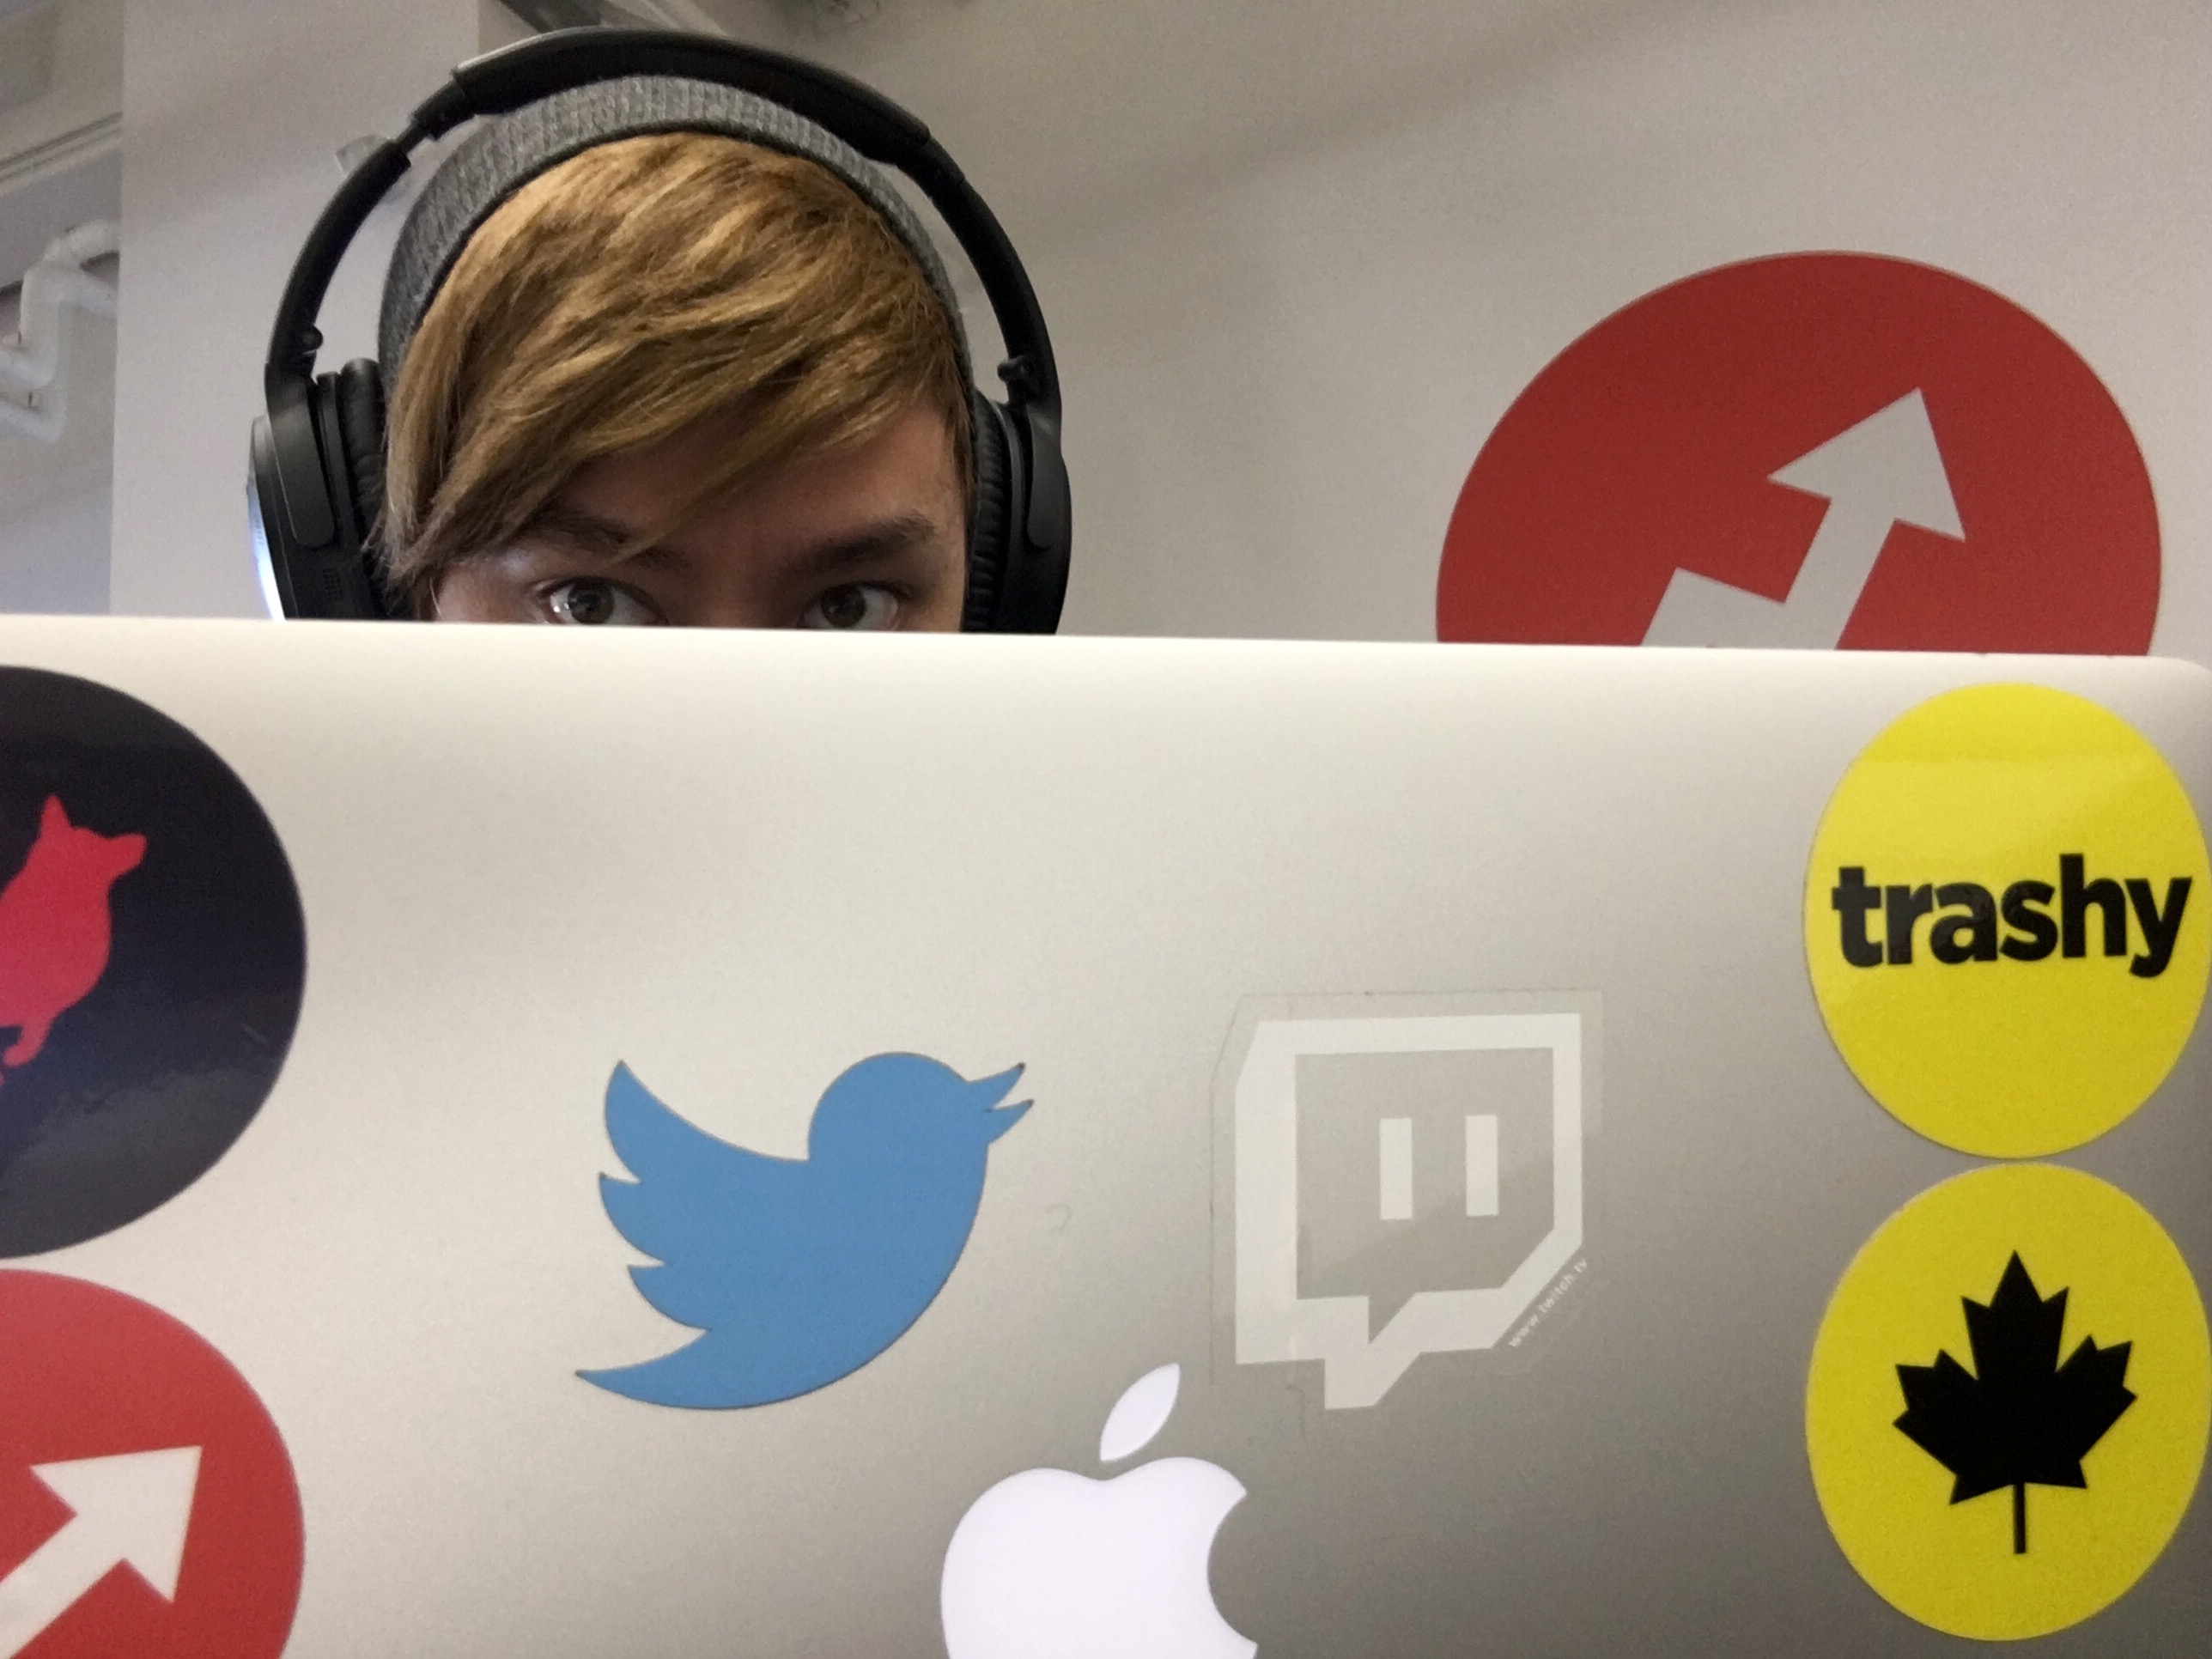 Jeff Barron, behind a laptop covered in social media logo stickers